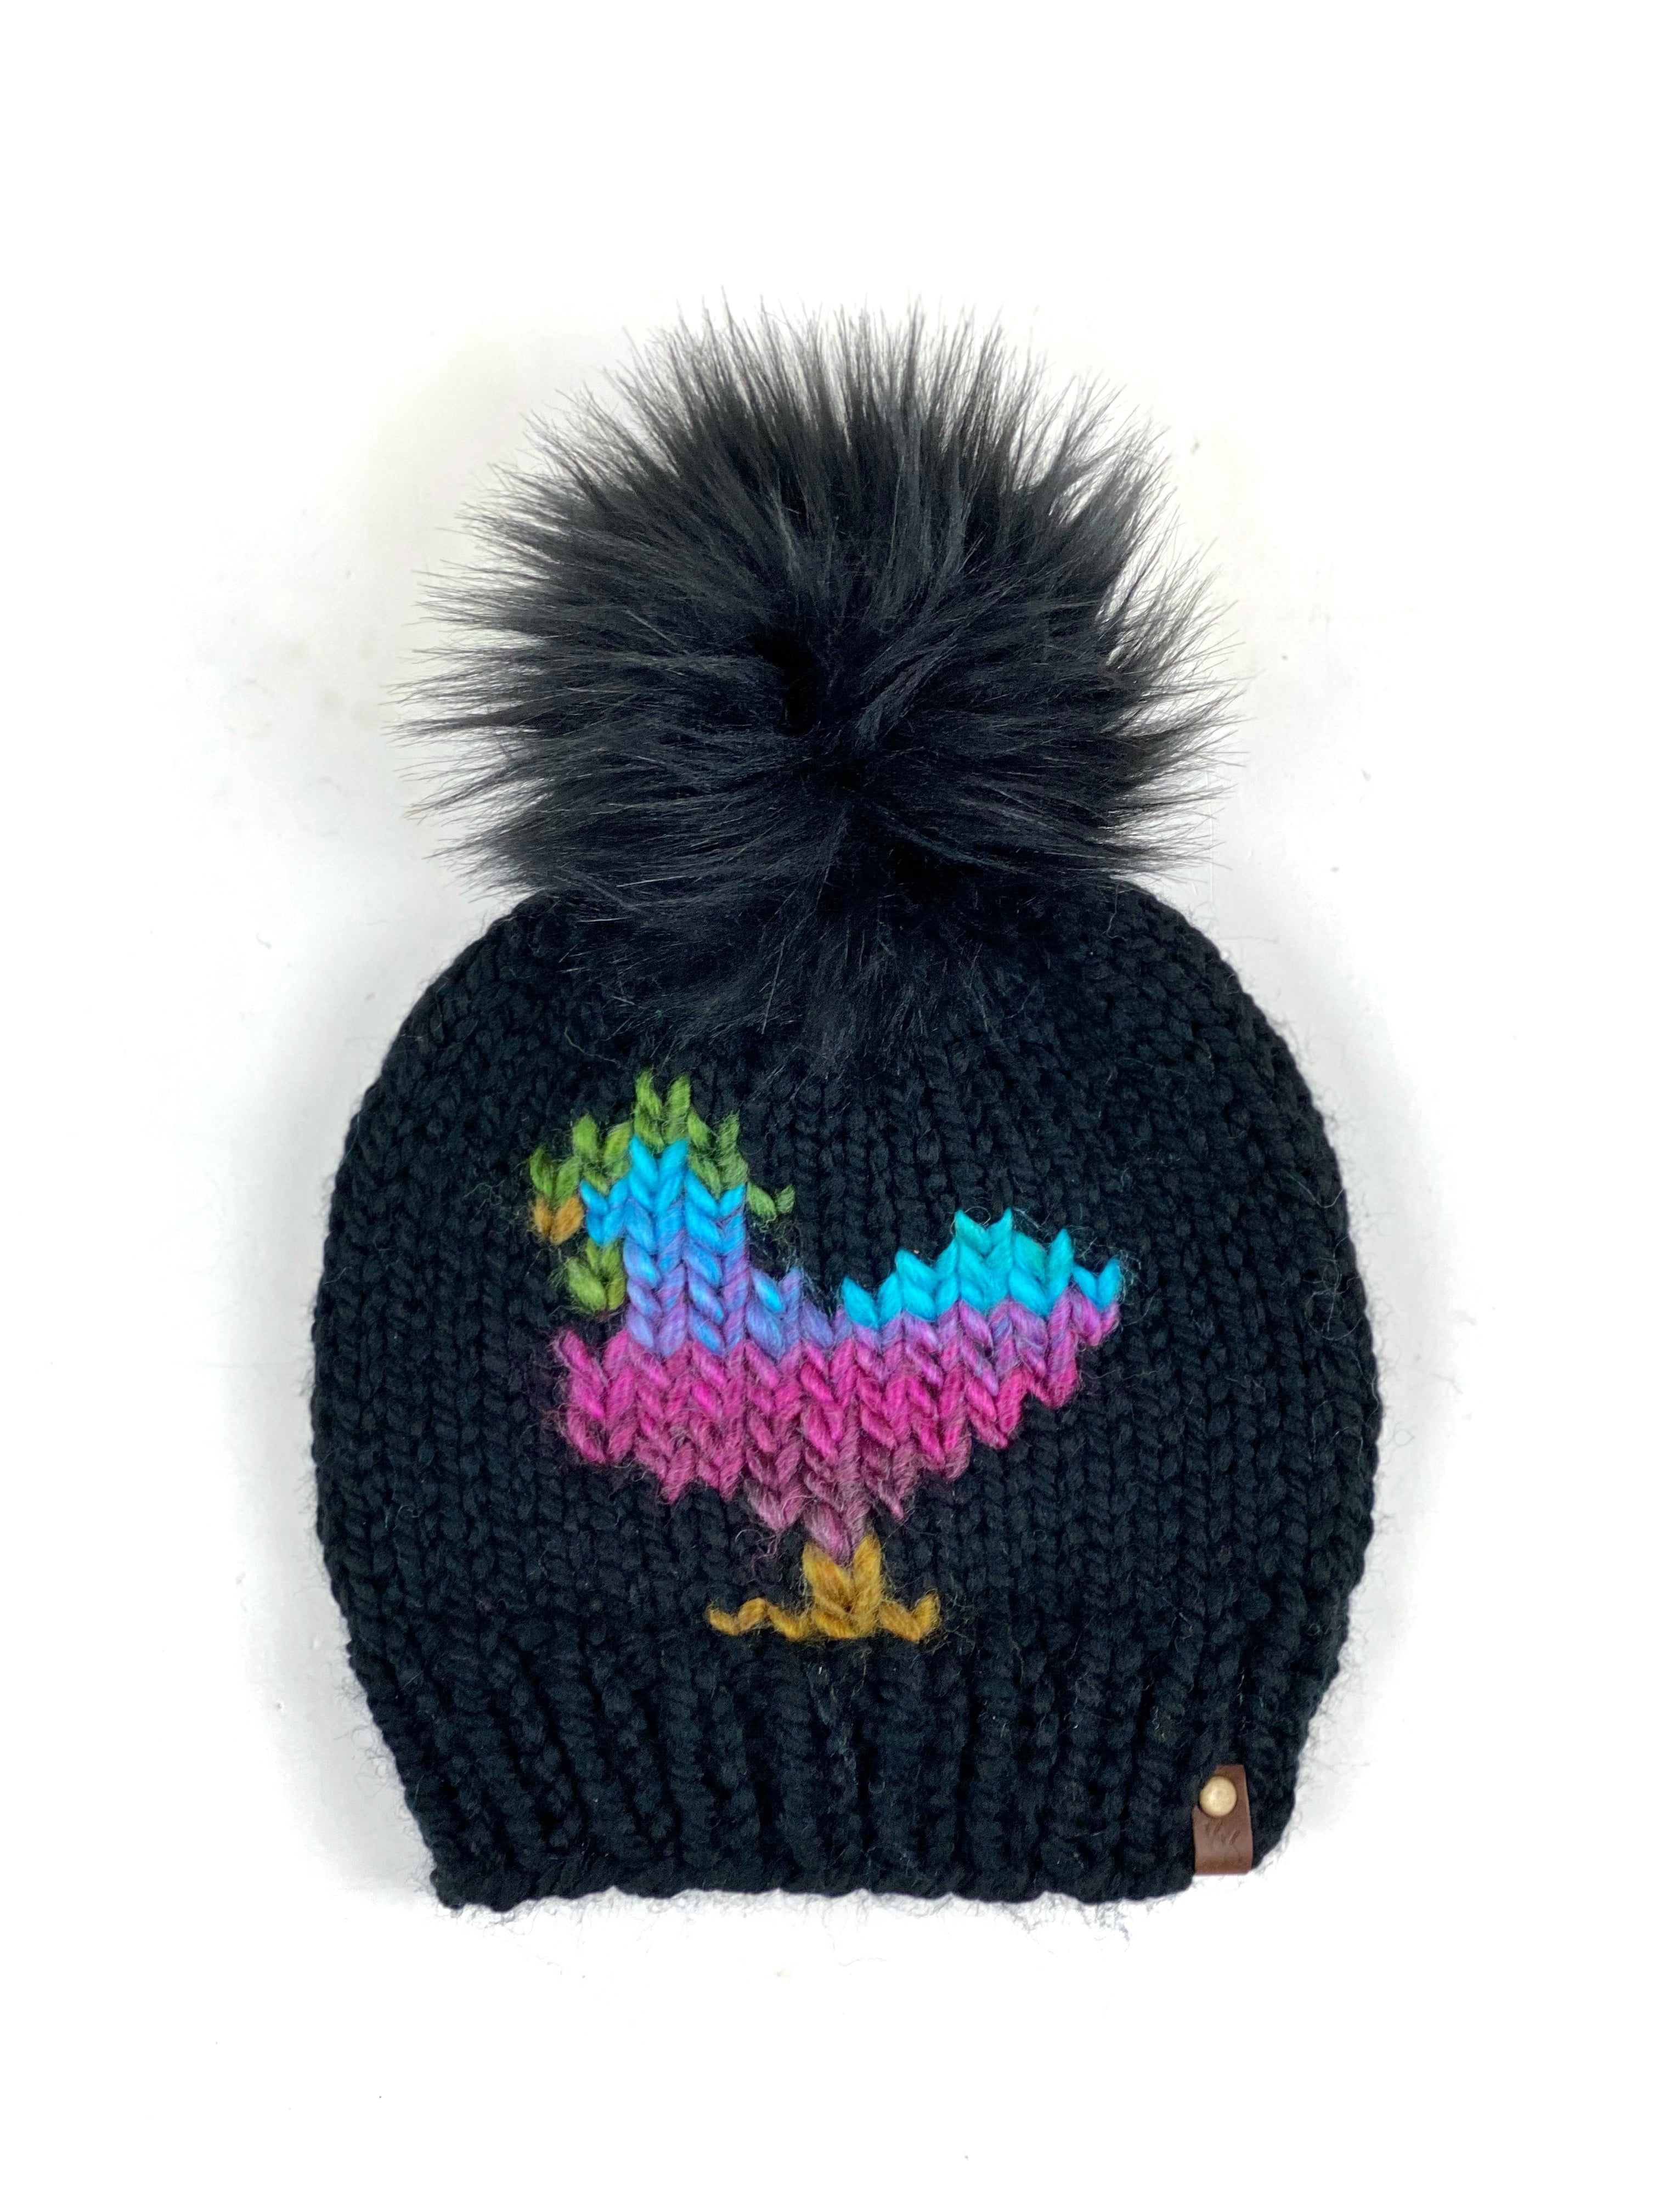 Black and Multi Colored Chicken Beanie Wool Blend Womens Adult Hat Faux Fur Pom Pom Hat